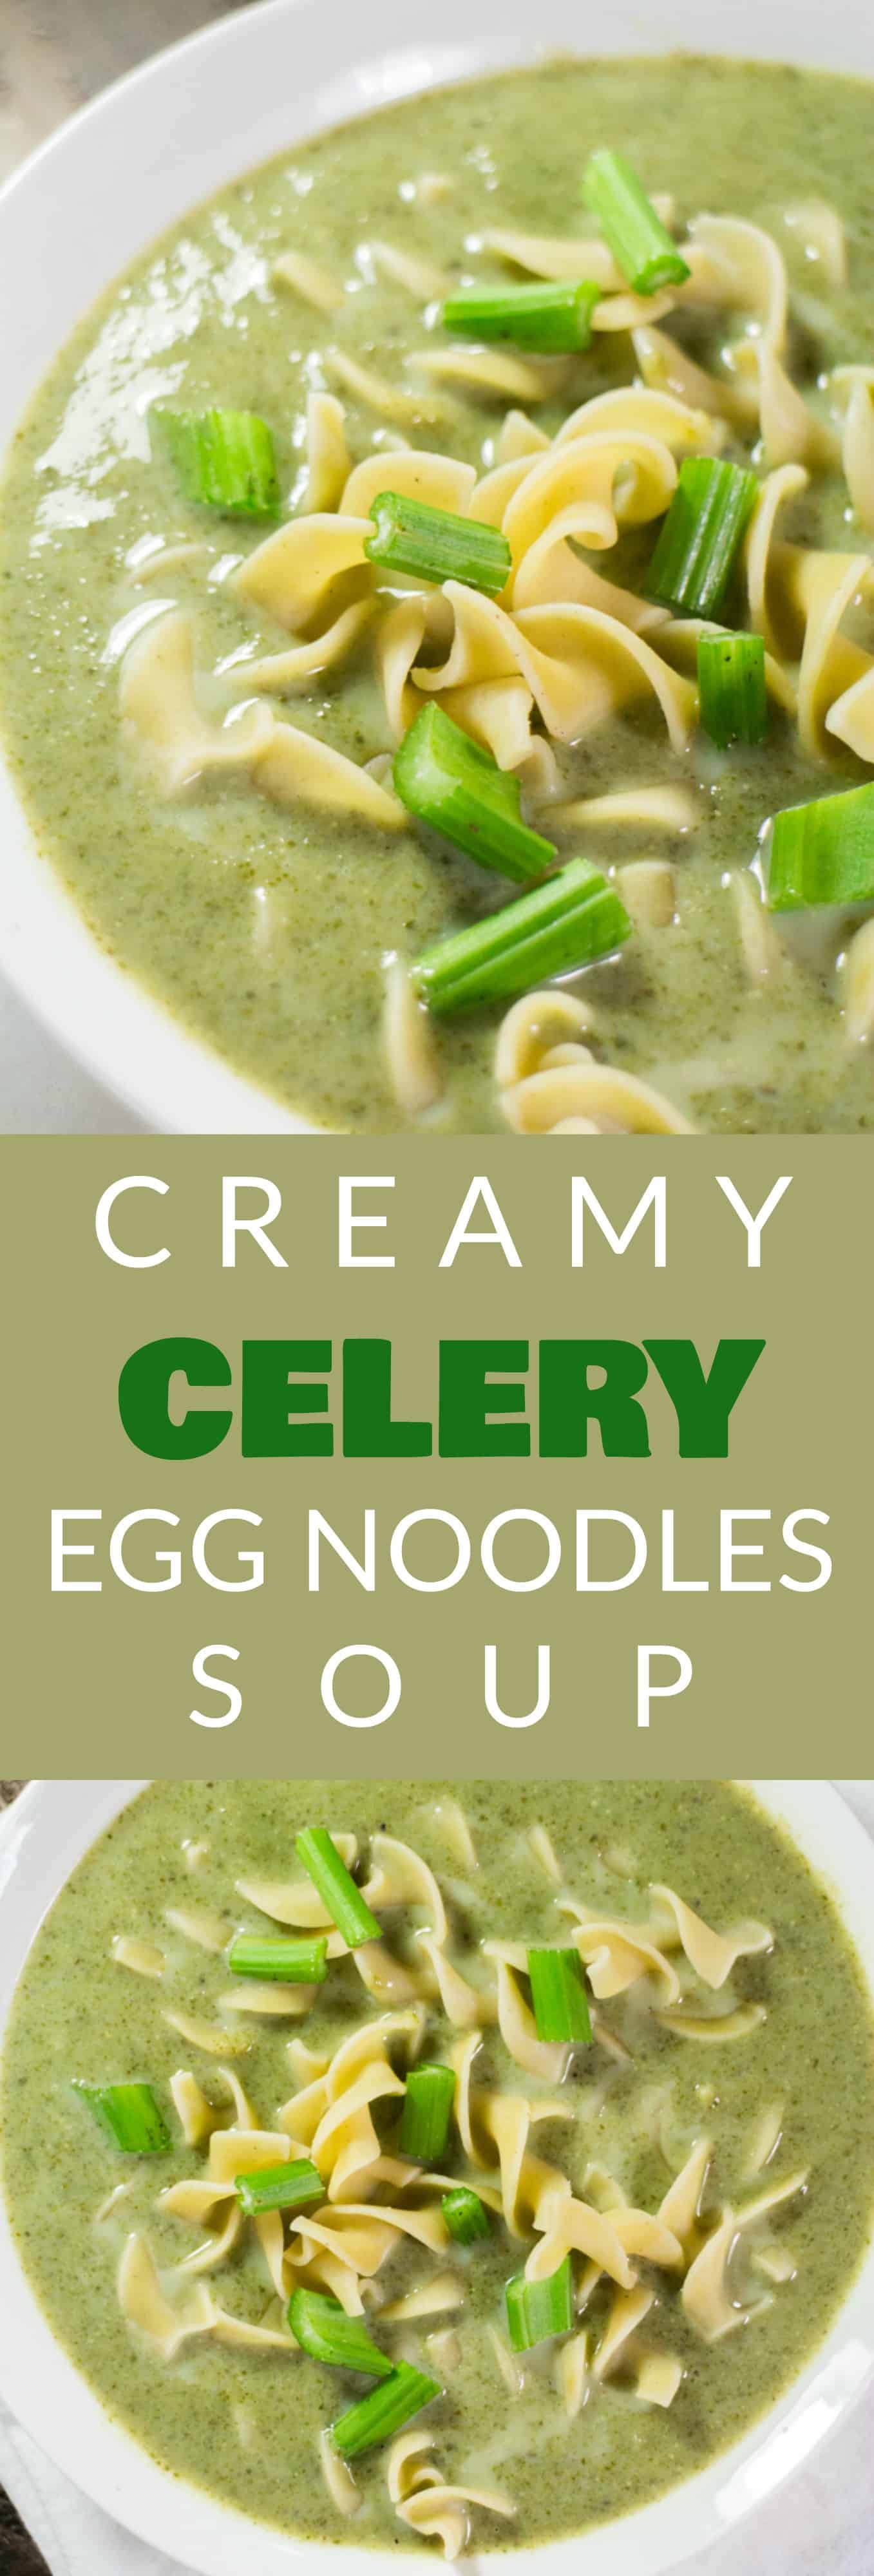 Creamy CELERY and Egg Noodles Soup recipe! This easy vegetarian soup is filled with vegetables and served with egg noodles for a hearty, healthy dinner! You can even add chicken in it for more protein! It's a simple and delicious way to eat your vegetables, even kids like it!  Whenever I ask myself "What should I do with a head of celery?" this soup is always the answer! 